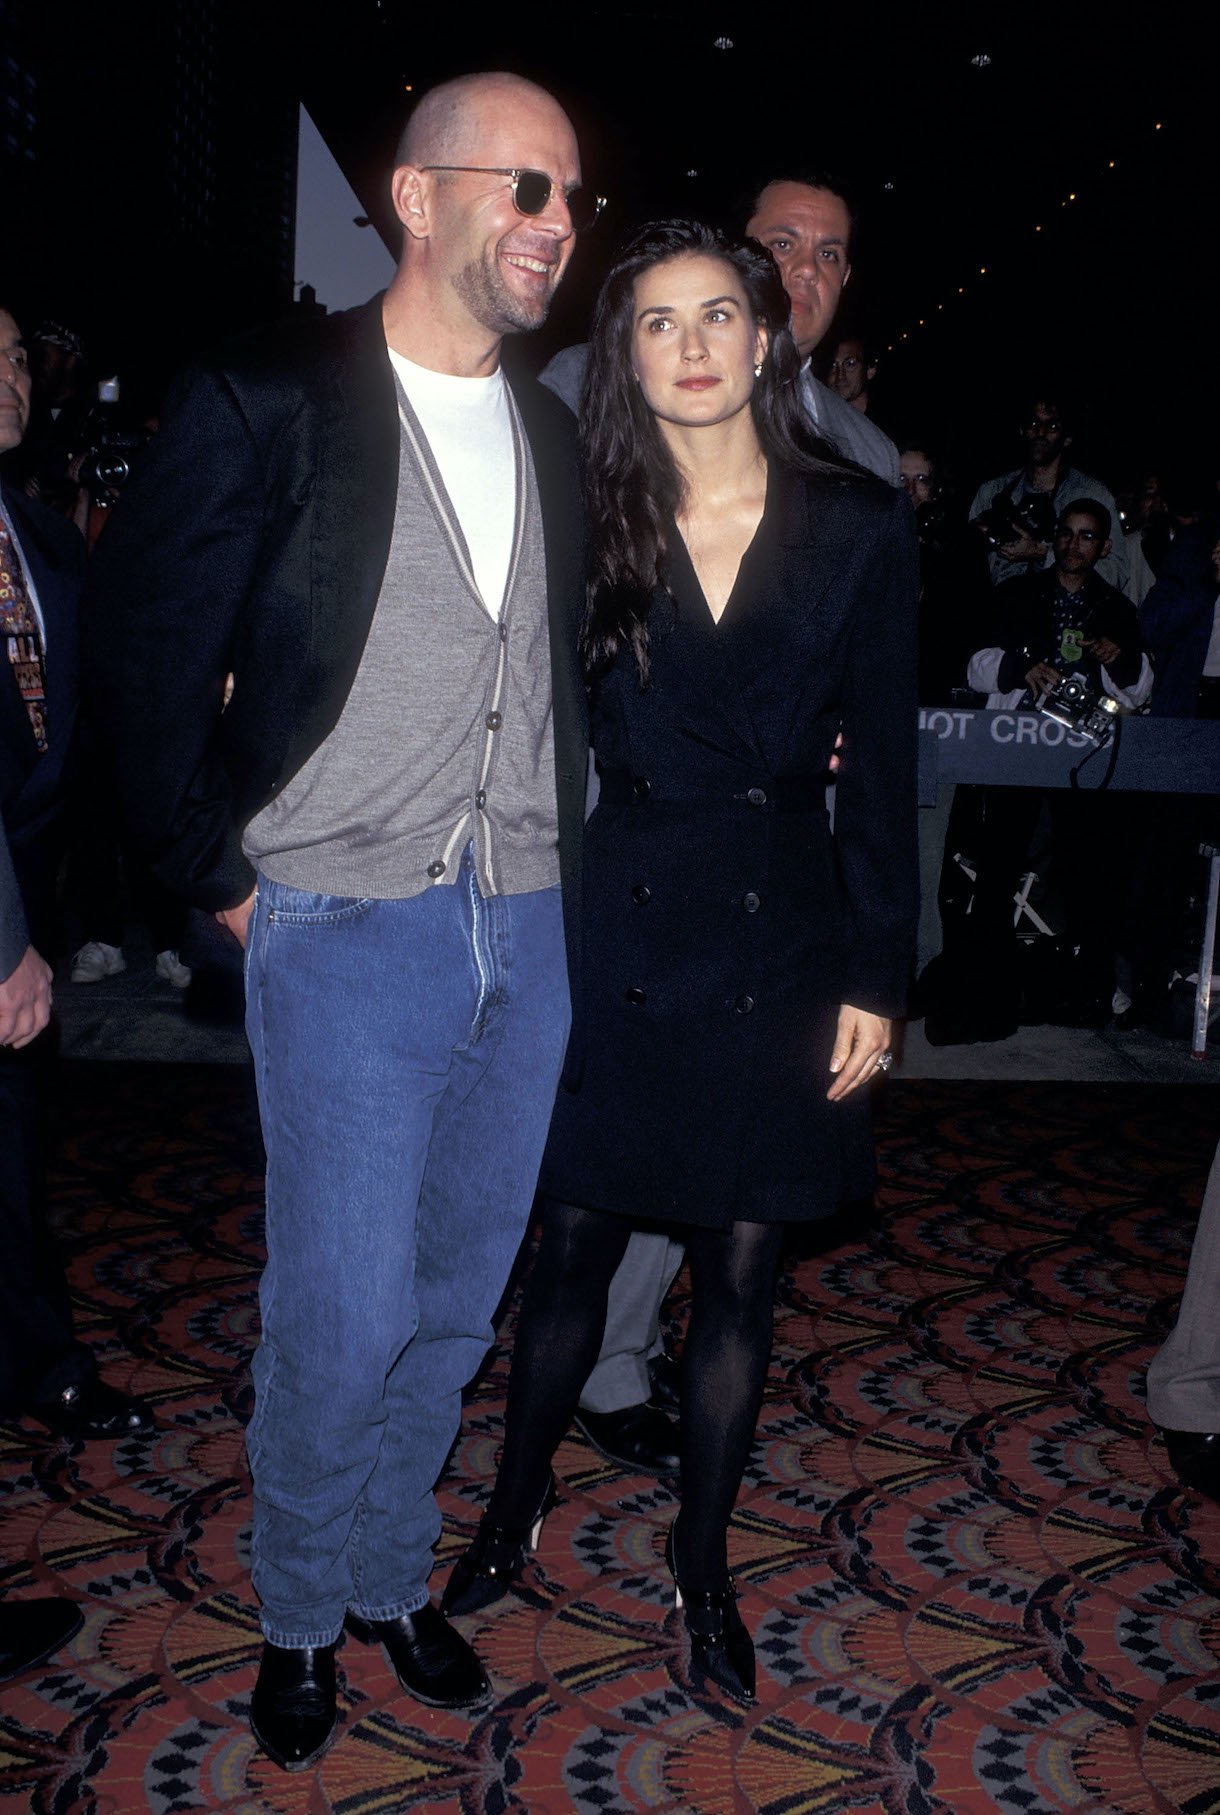 Bruce Willis and actress Demi Moore attend the "Die Hard: With a Vengeance" New York City Premiere on May 15, 1995